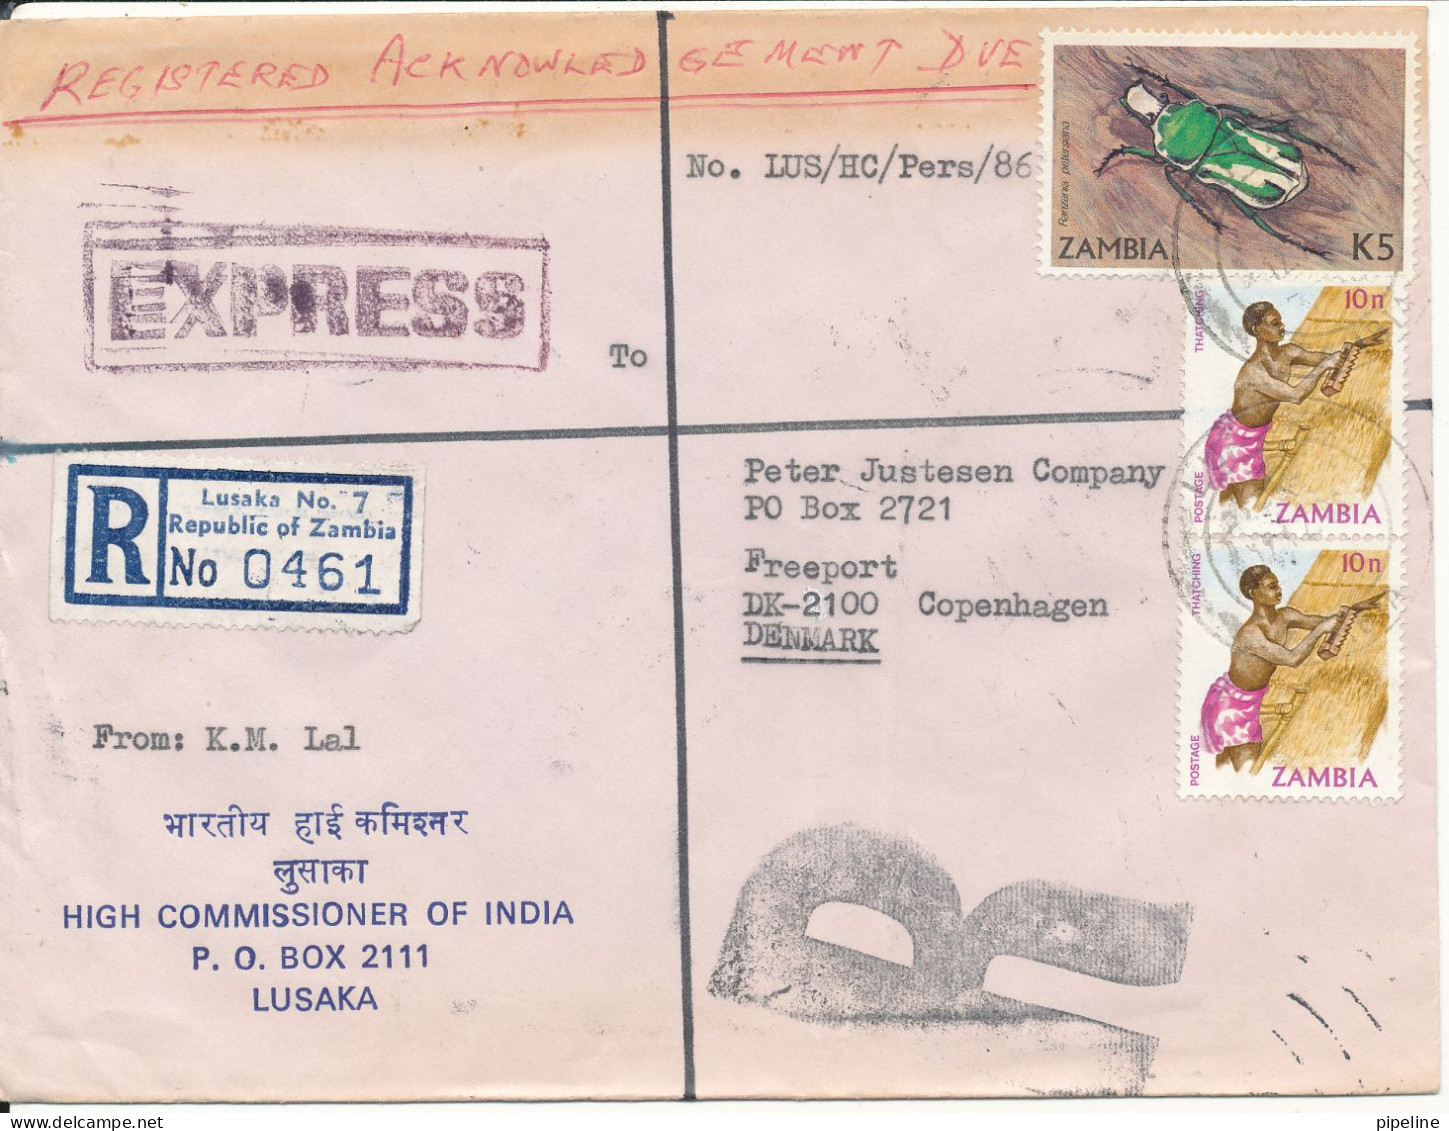 Zambia Registered Air Mail Cover Sent Express To Denmark 17-12-1986 Topic Stamps Sent From India High Commission Lusaka - Zambie (1965-...)